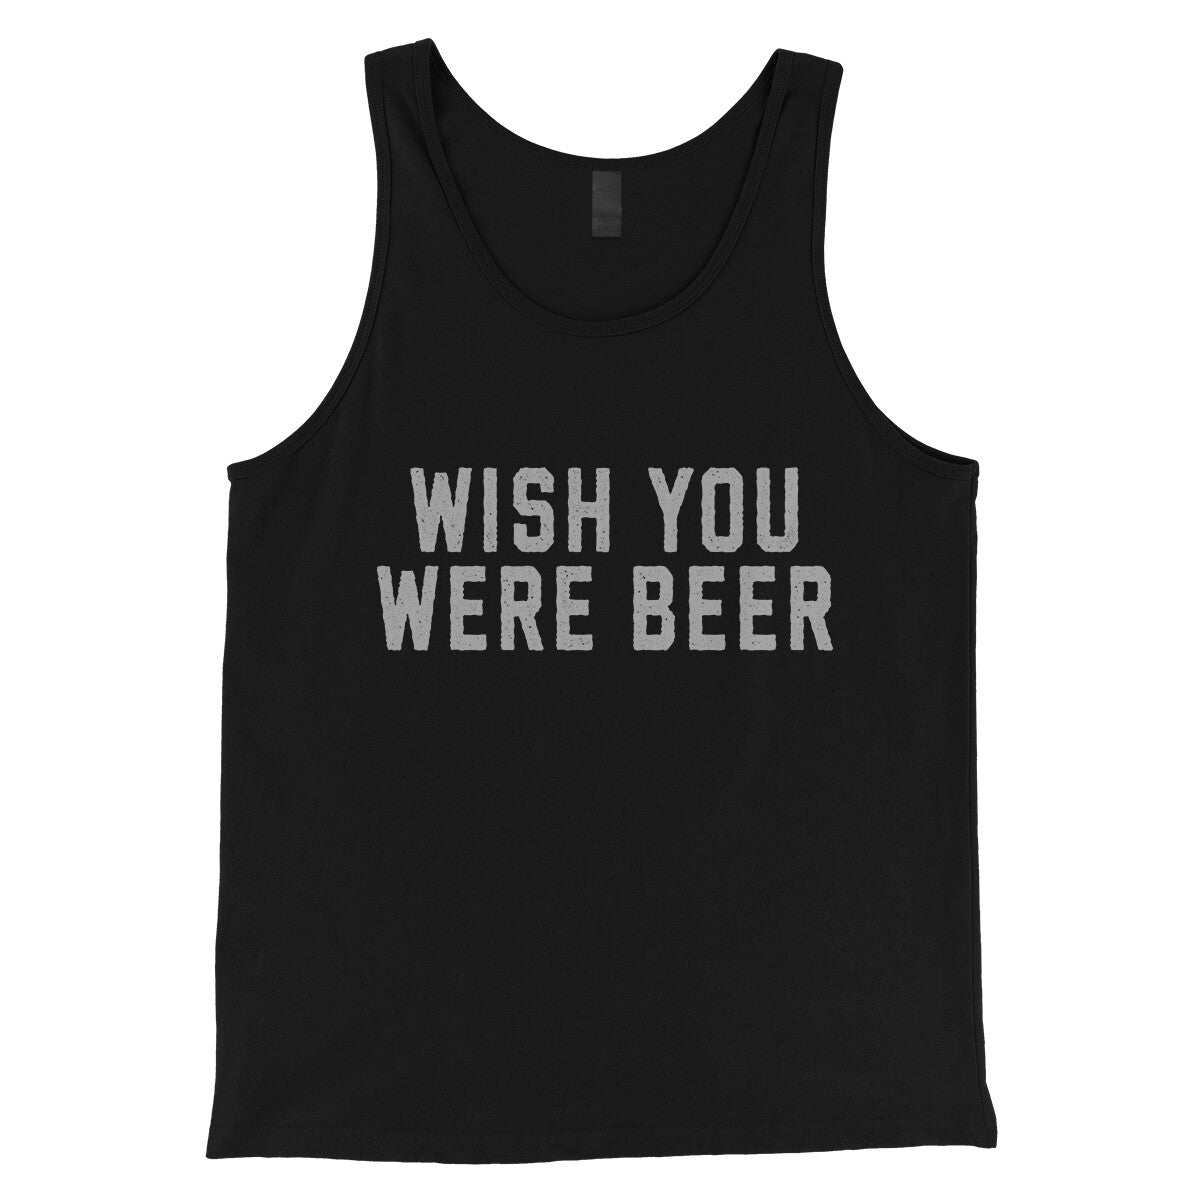 Wish You Were Beer in Black Color